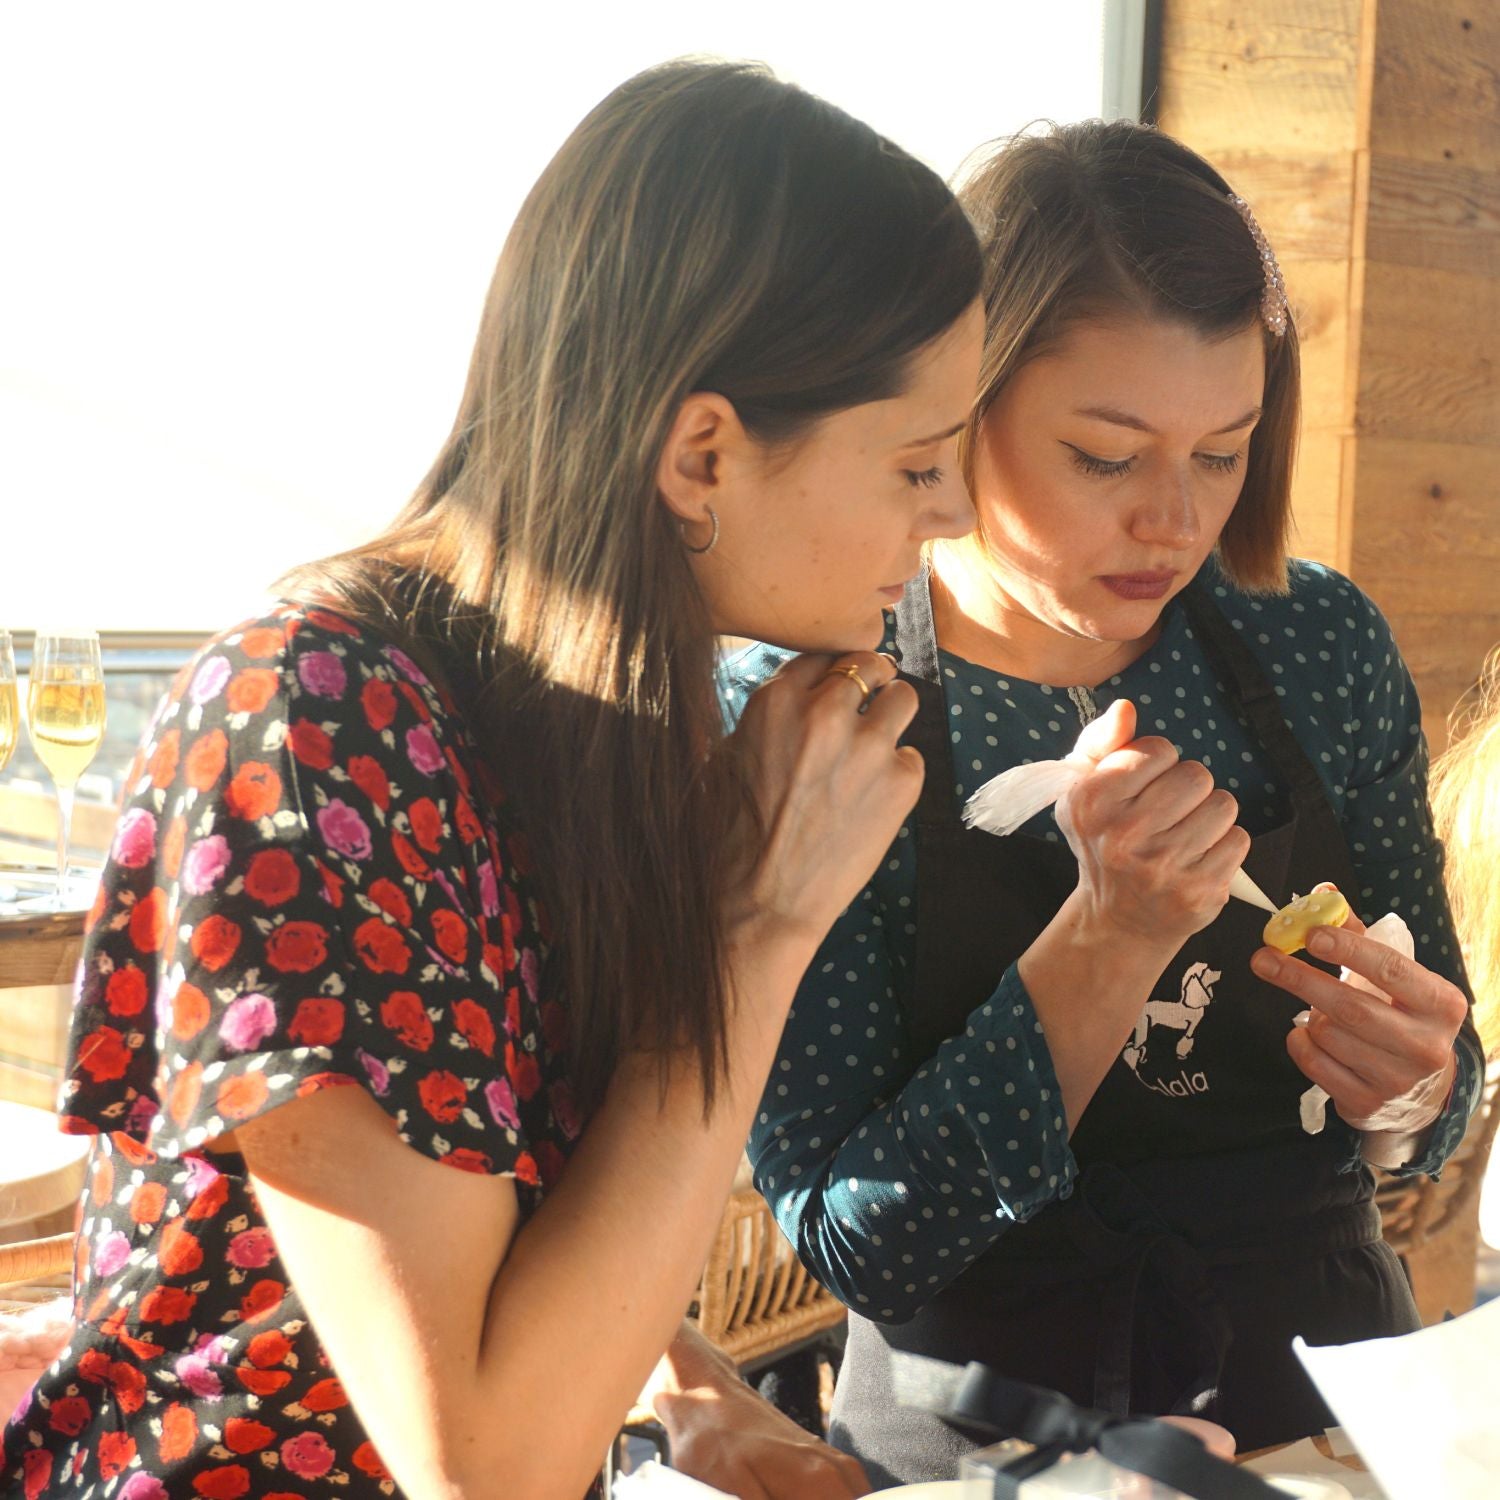 Two women decorating macarons at an Oh La La! Macarons event